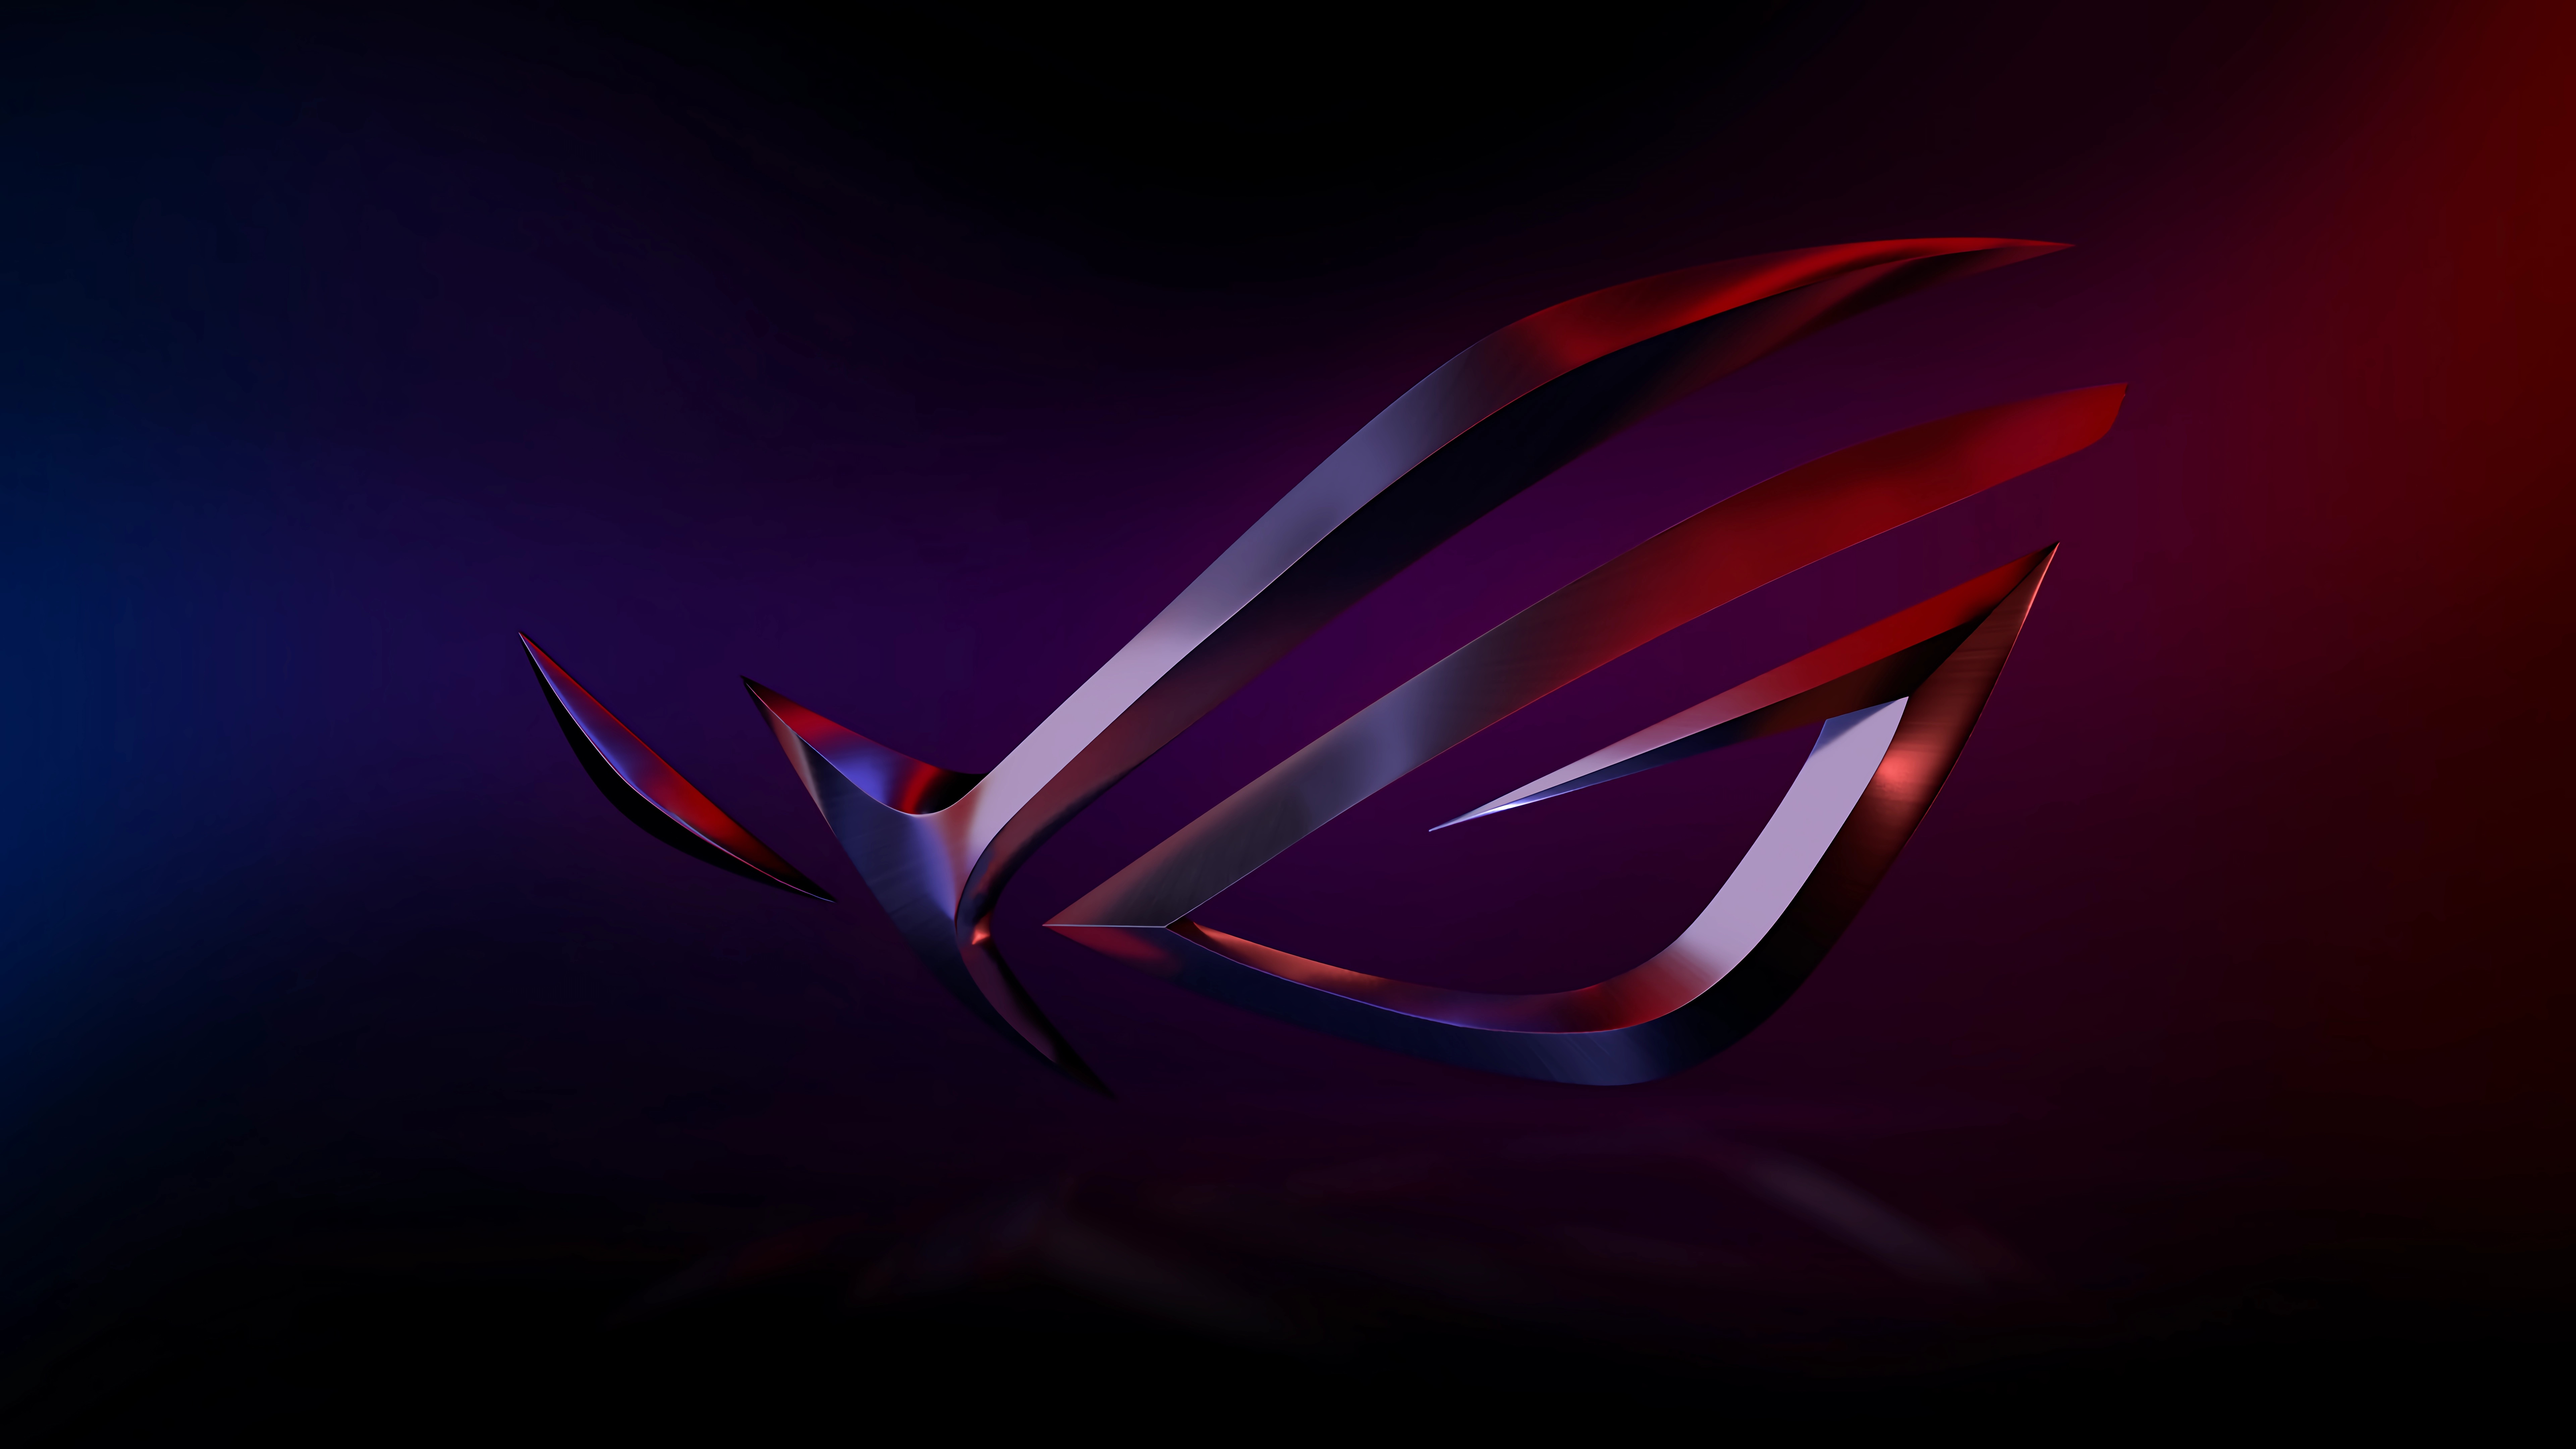 General 7680x4320 Republic of Gamers logo abstract 3D Abstract